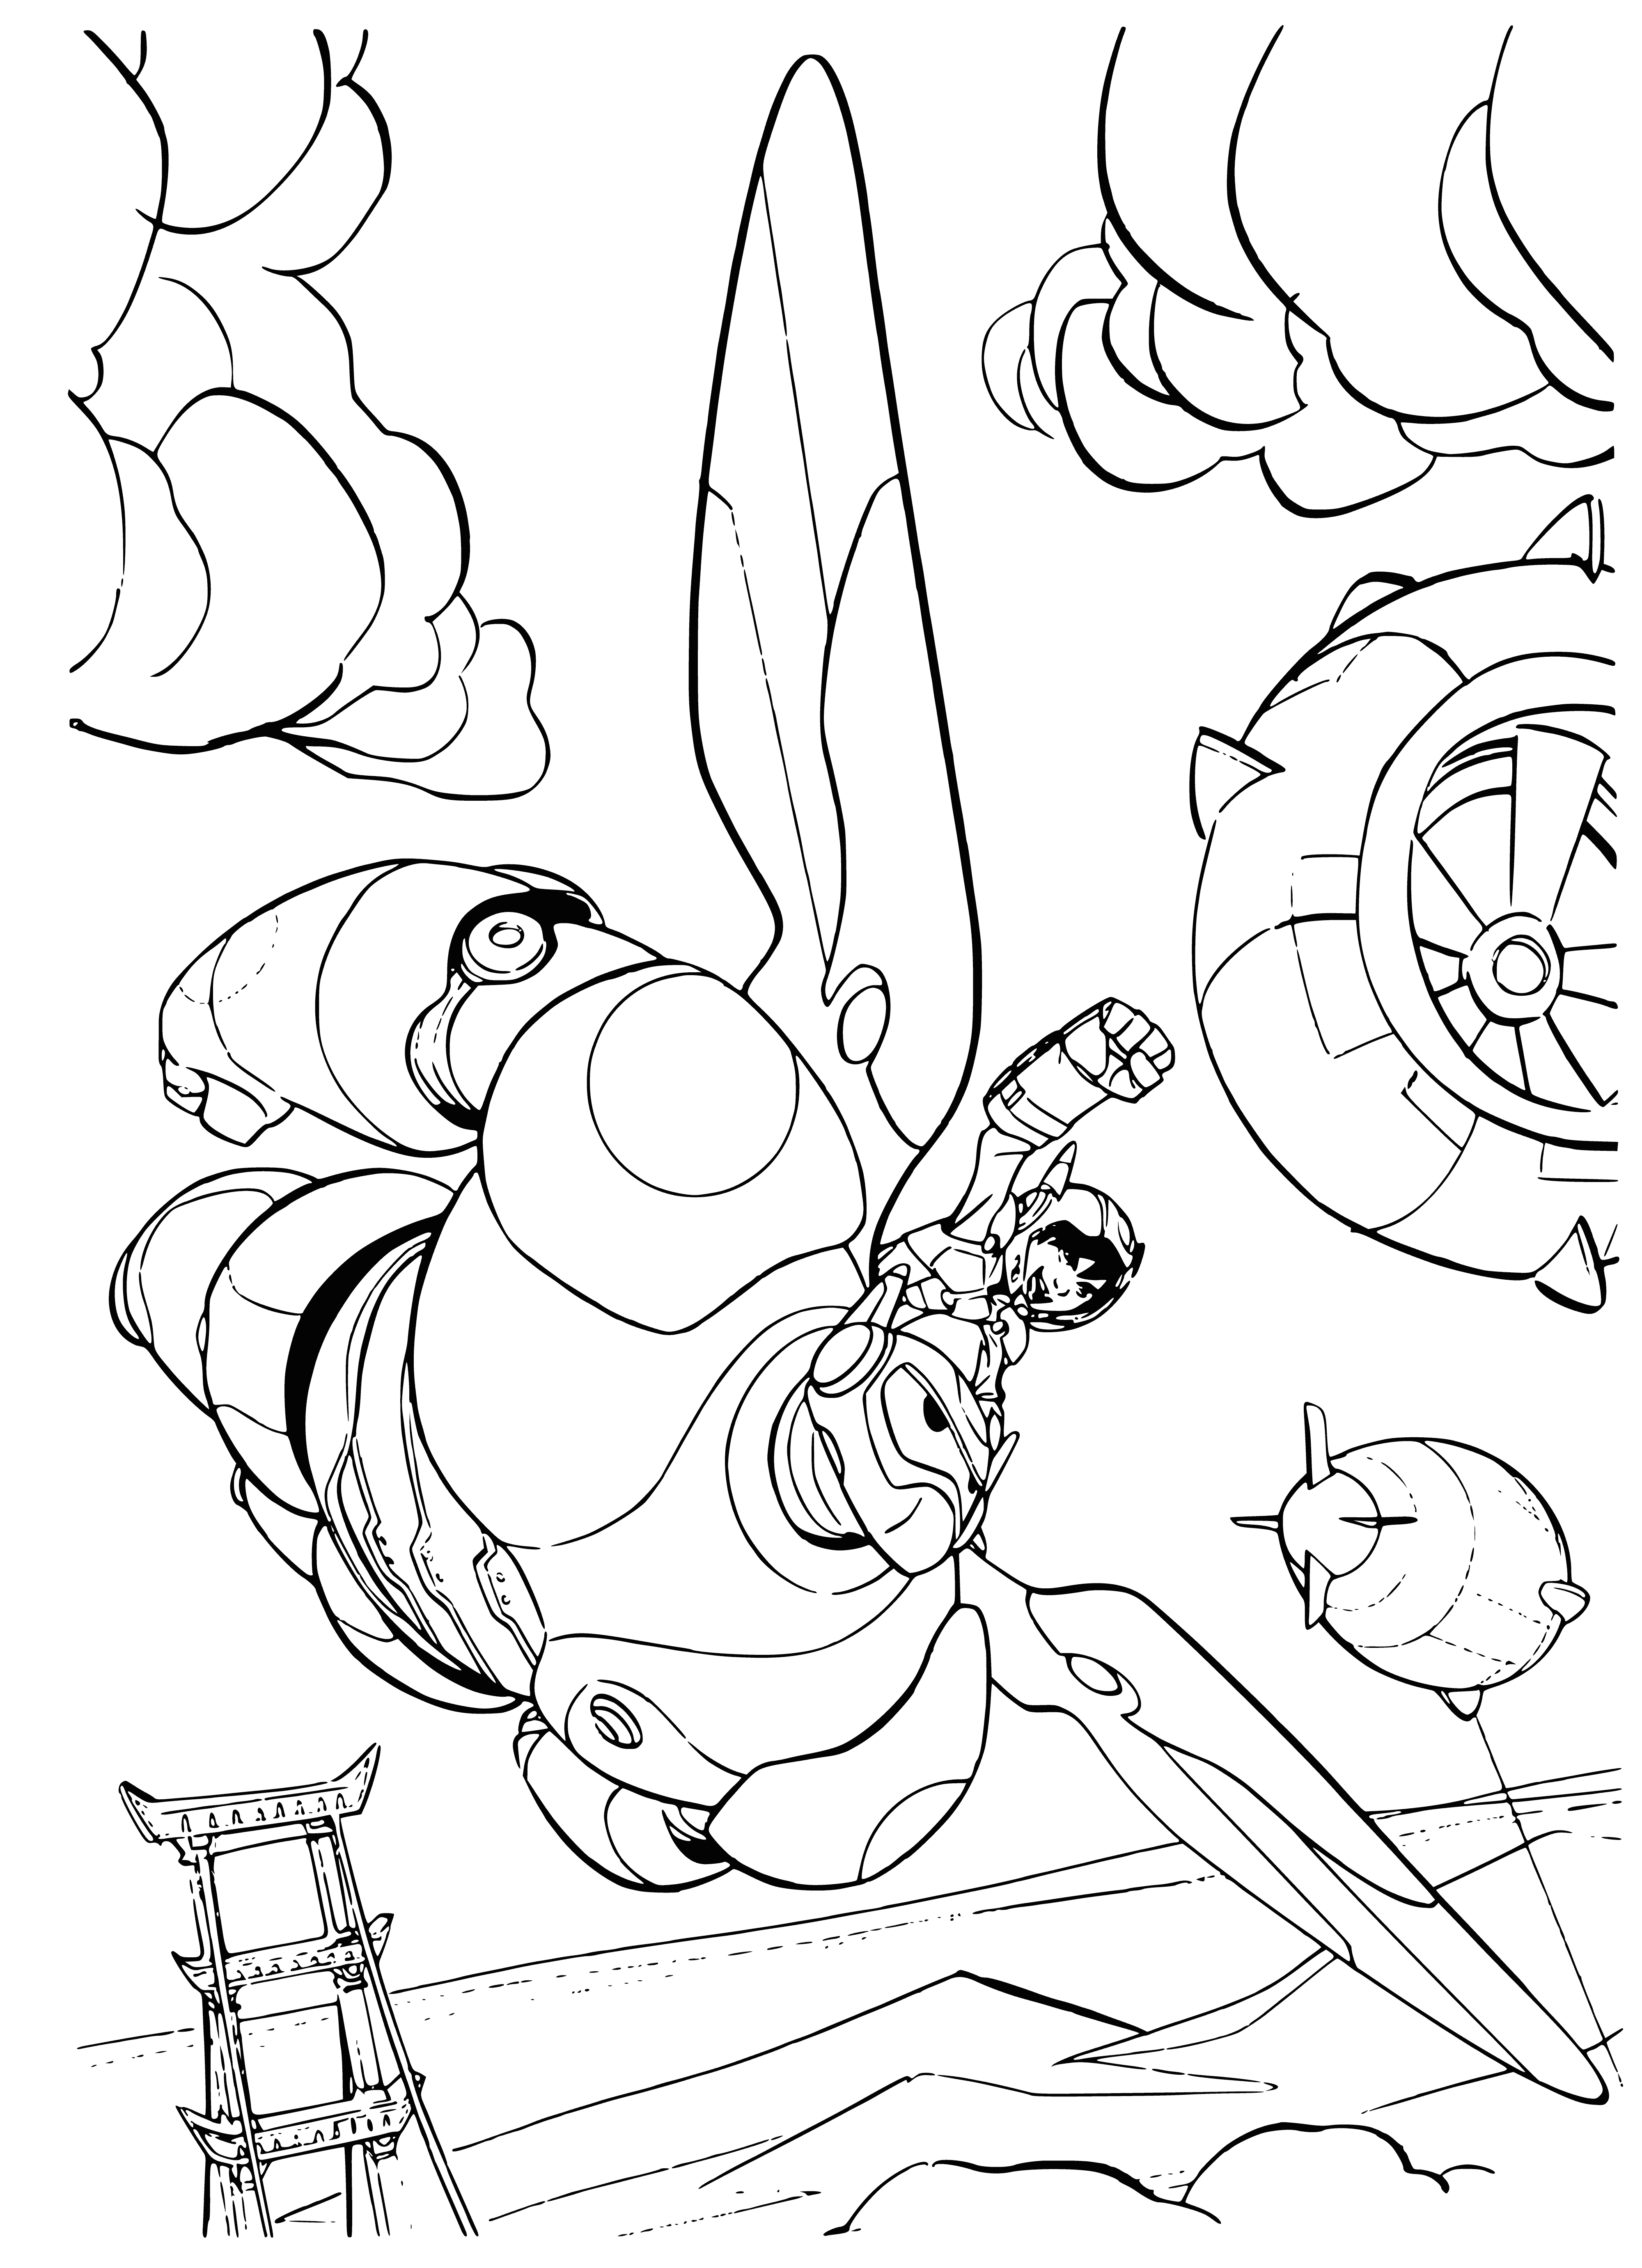 Hiro and Baymax save the city coloring page